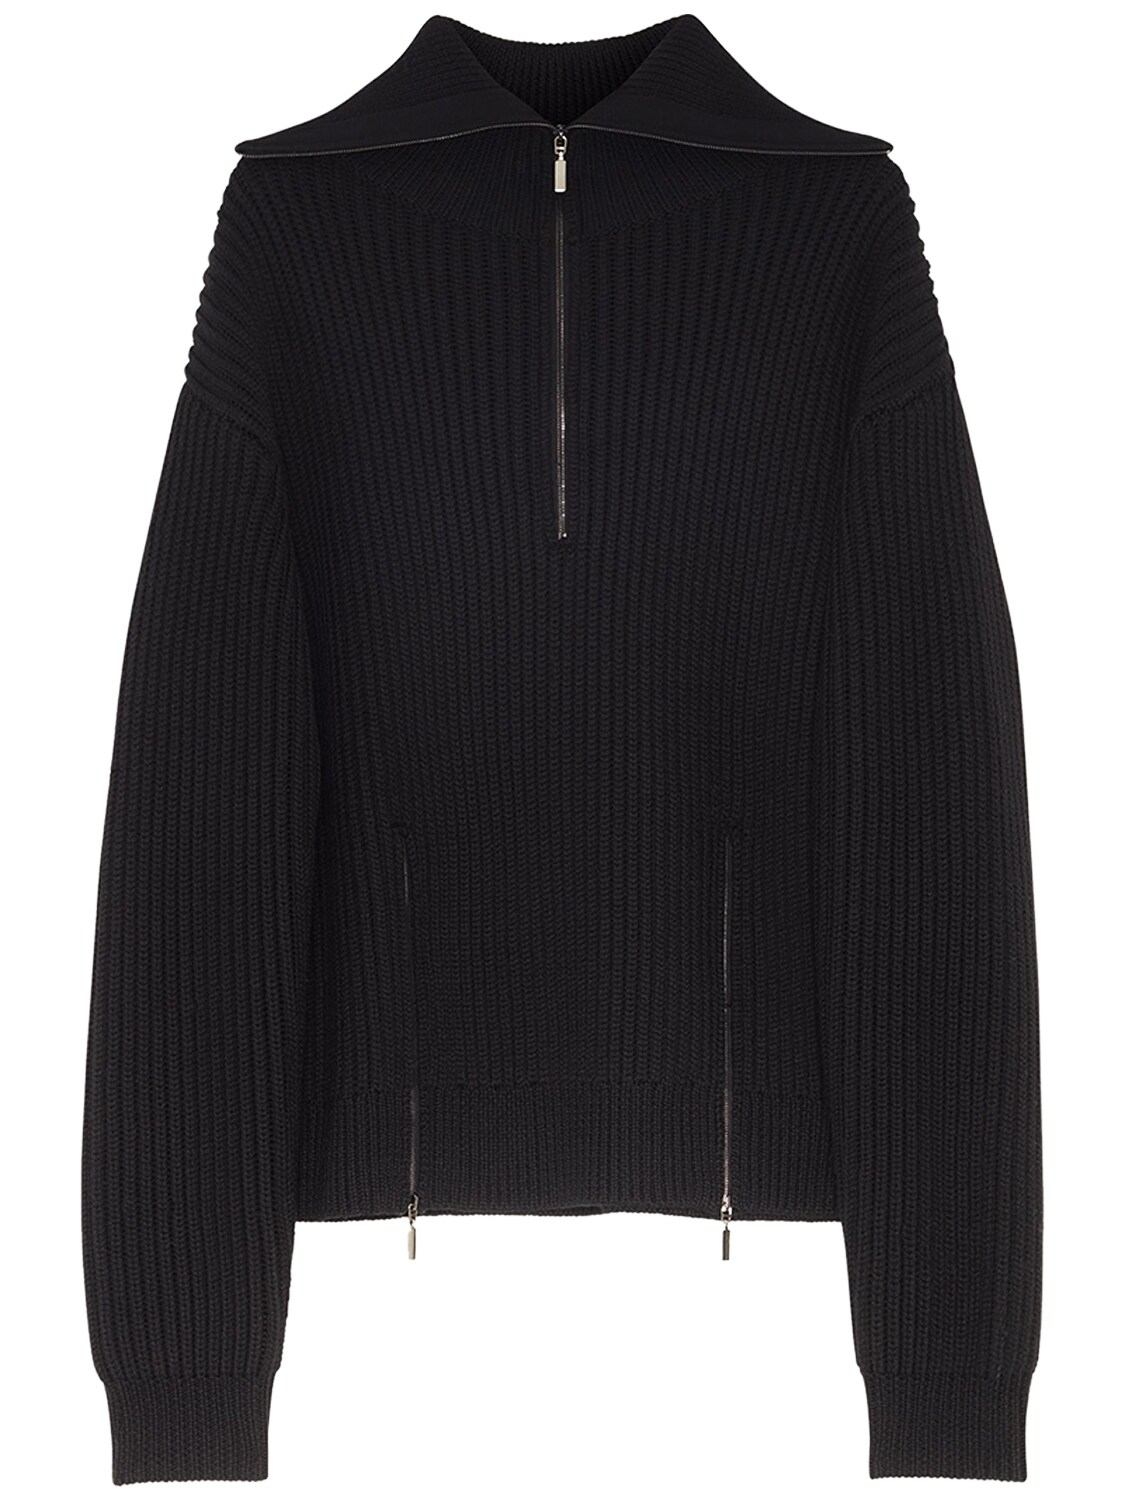 Ribbed Wool Sweater W/ Zip Details